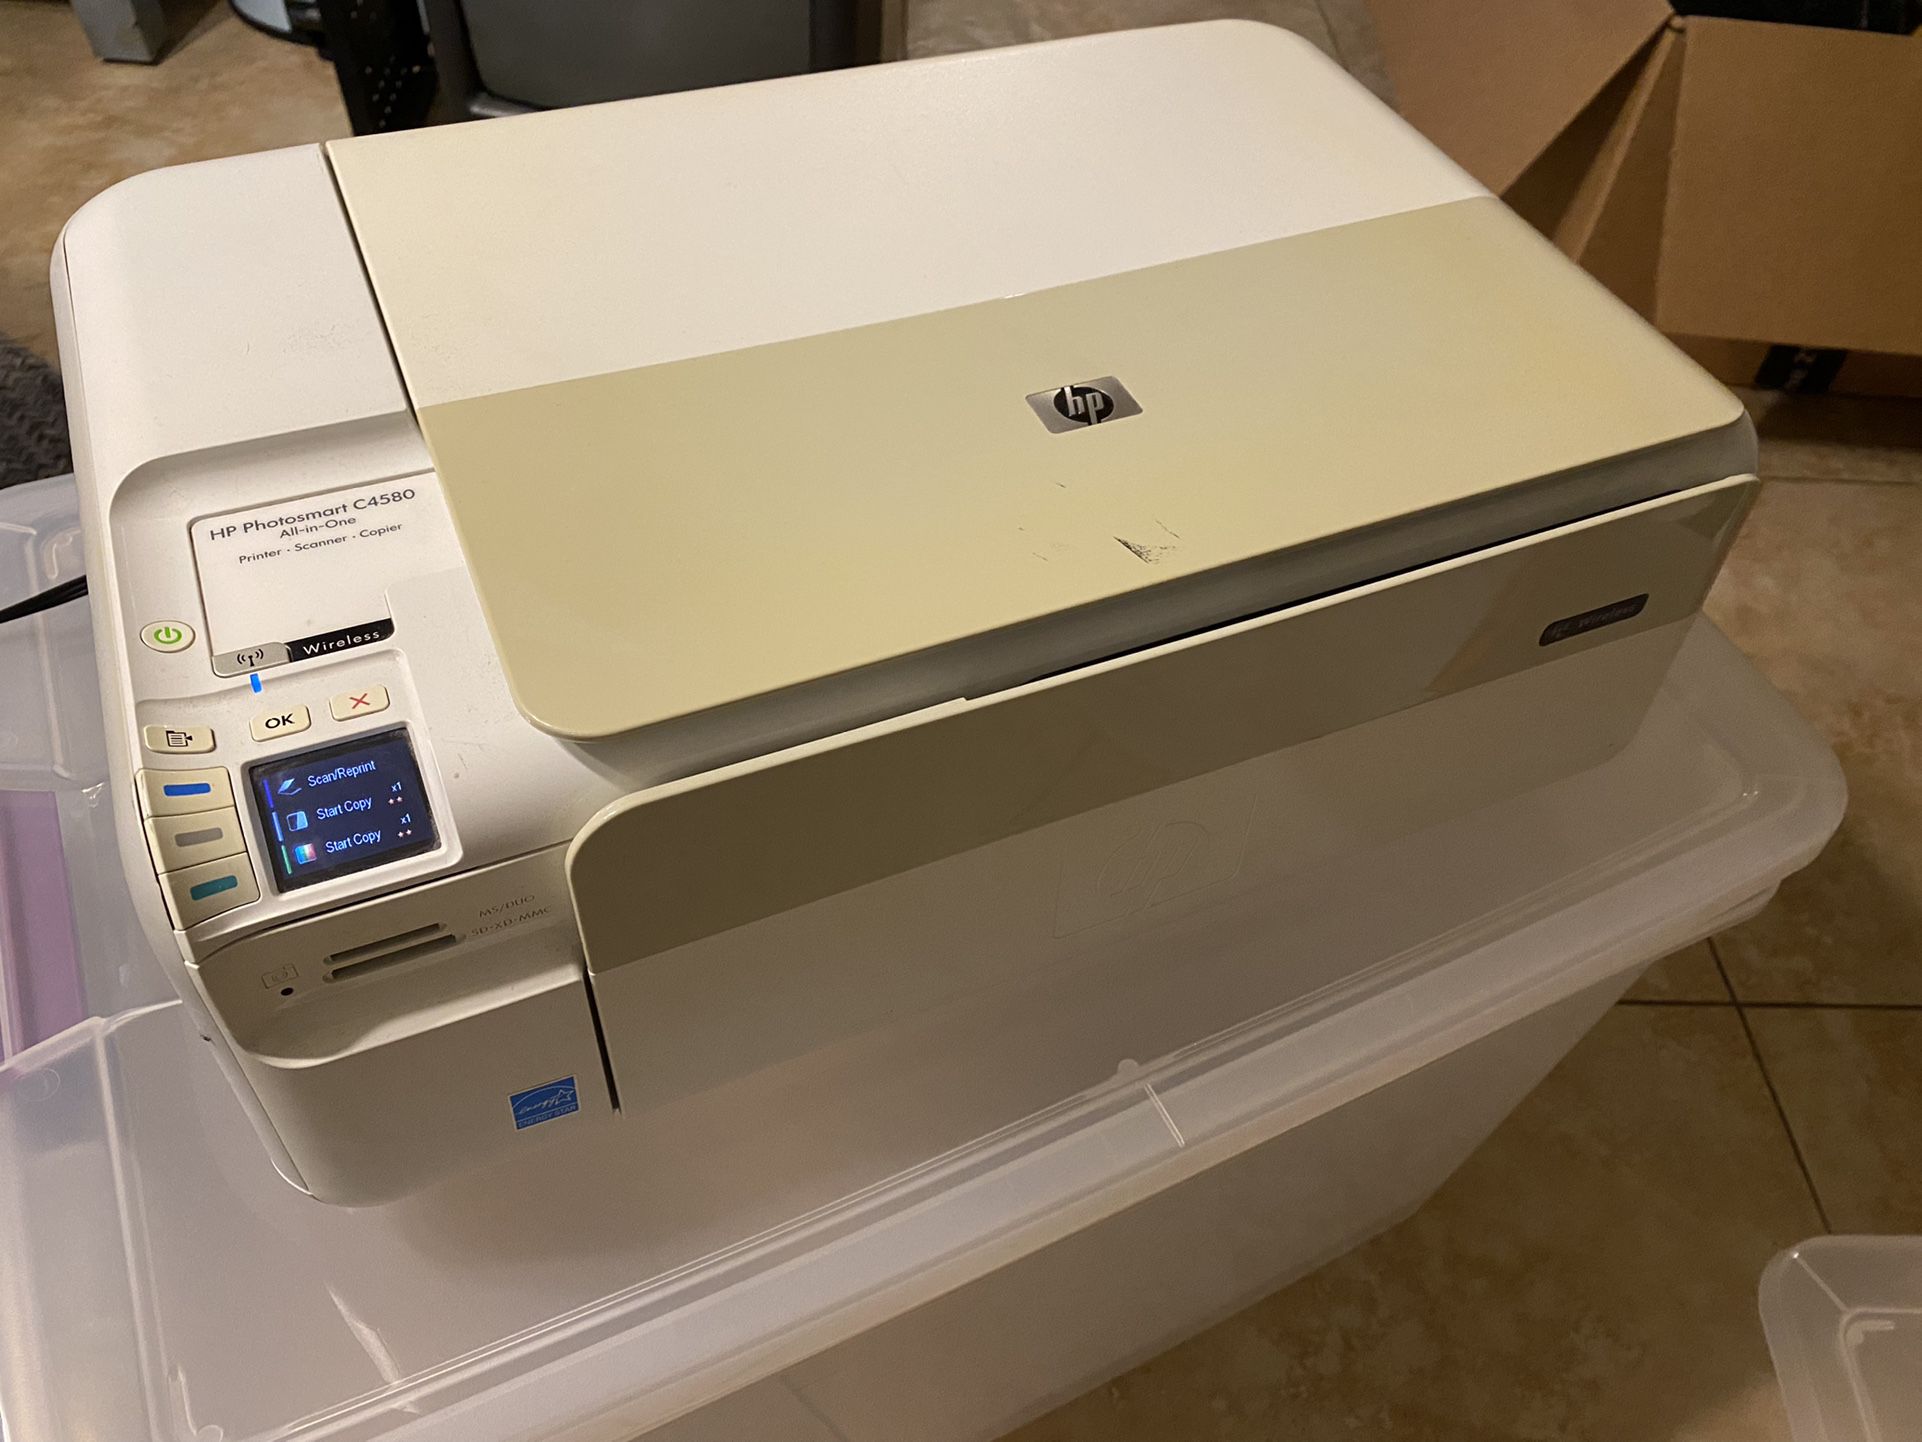 HP C4580 All-In-One Inkjet Printer power cord And Usb Sale in Las Vegas, NV - OfferUp